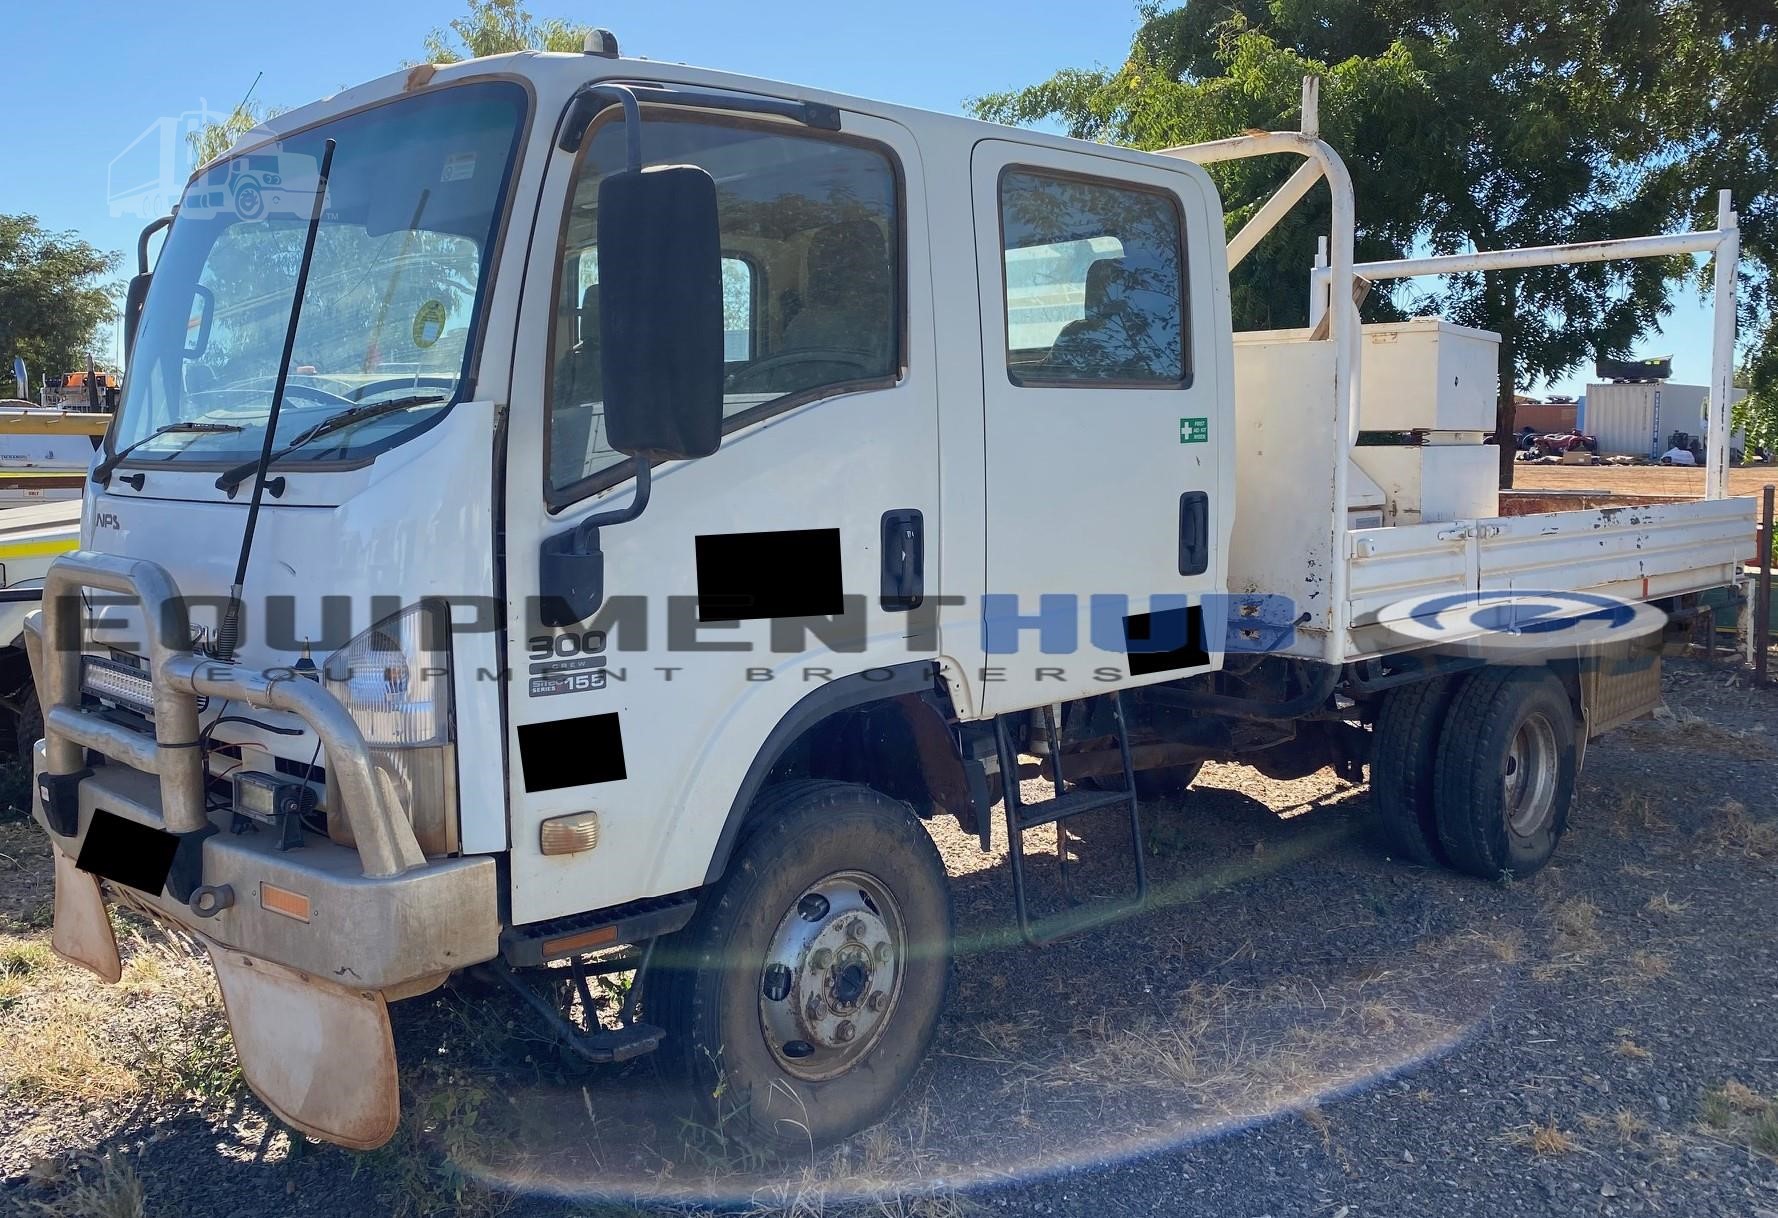 Isuzu Nps Flatbed Trucks For Sale 1 Listings Truckpaper Com Page 1 Of 1